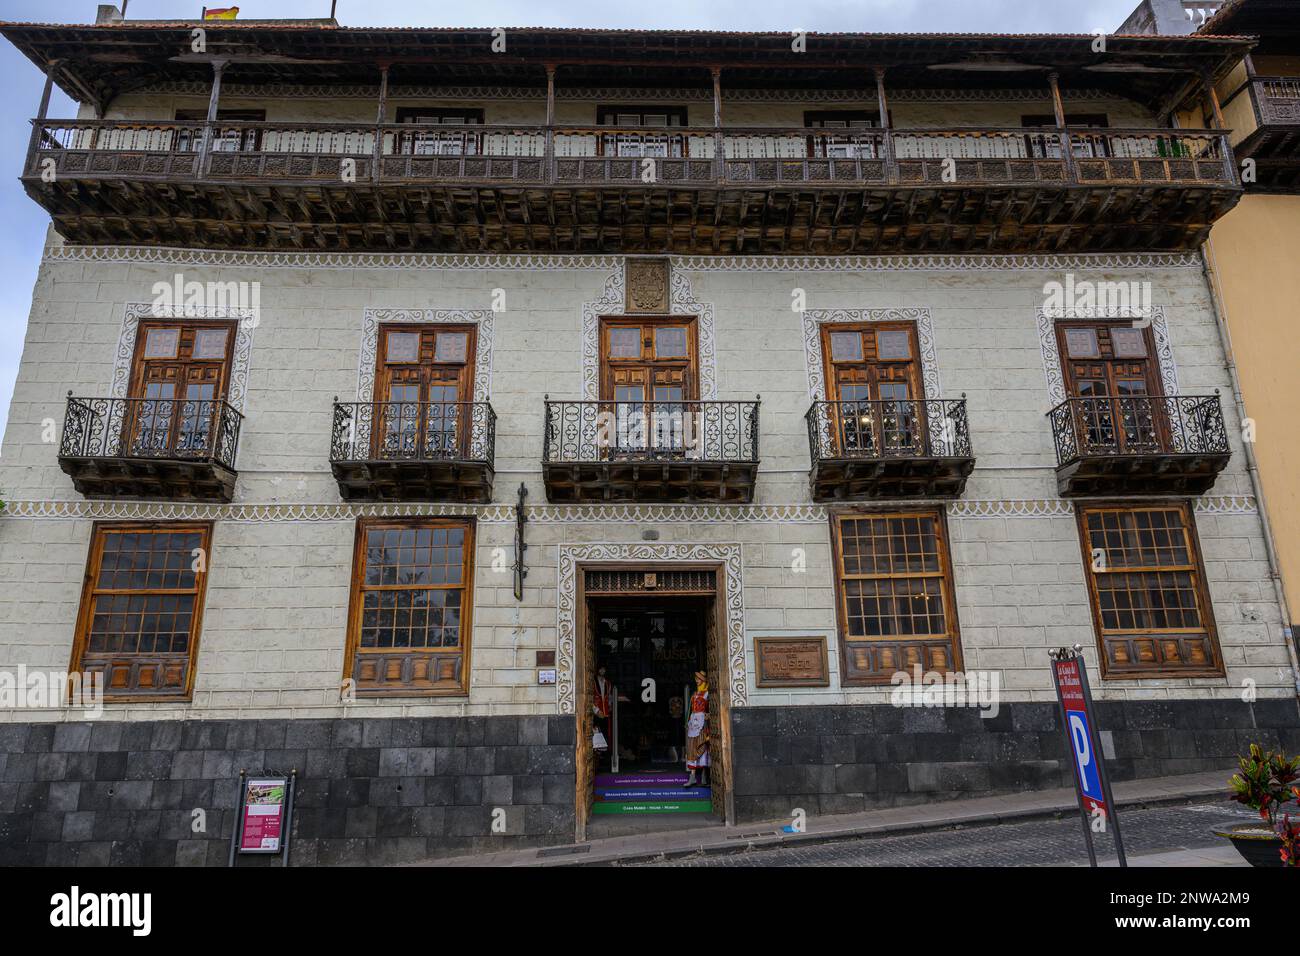 The main facade of the Casa de los Balcones in La Orotave with its ornate sgraffito motifs around the sash windows & wrought iron and wooden balconies Stock Photo